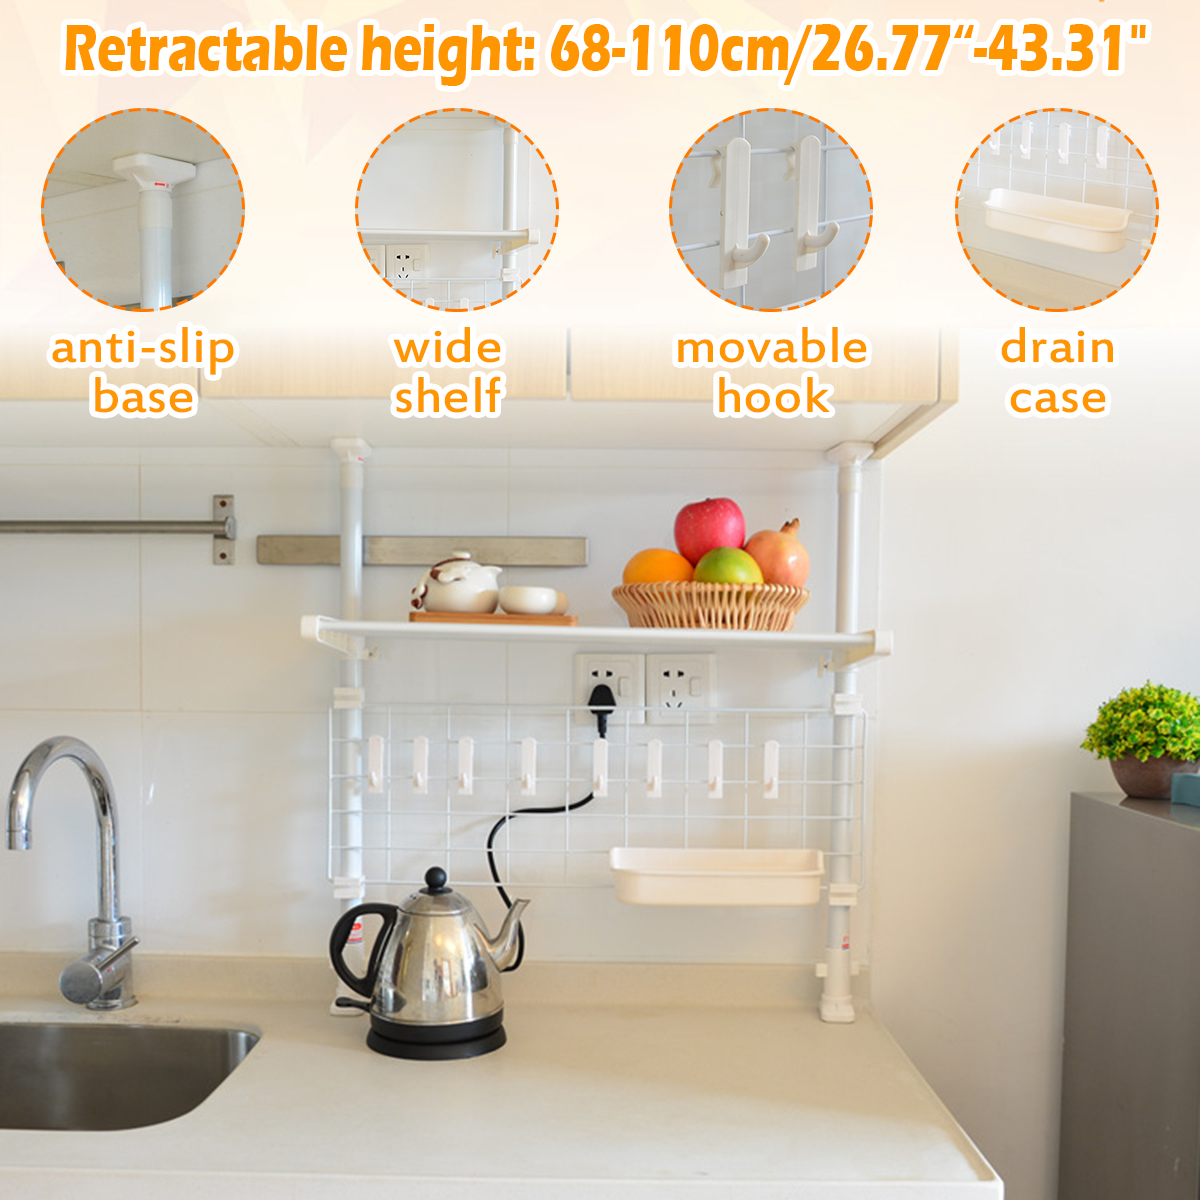 Kitchen-Storage-Rack-Plate-Pot-Microwave-Oven-Shelf-Drain-Retractable-Pole-with-8-Hooks-1653225-1